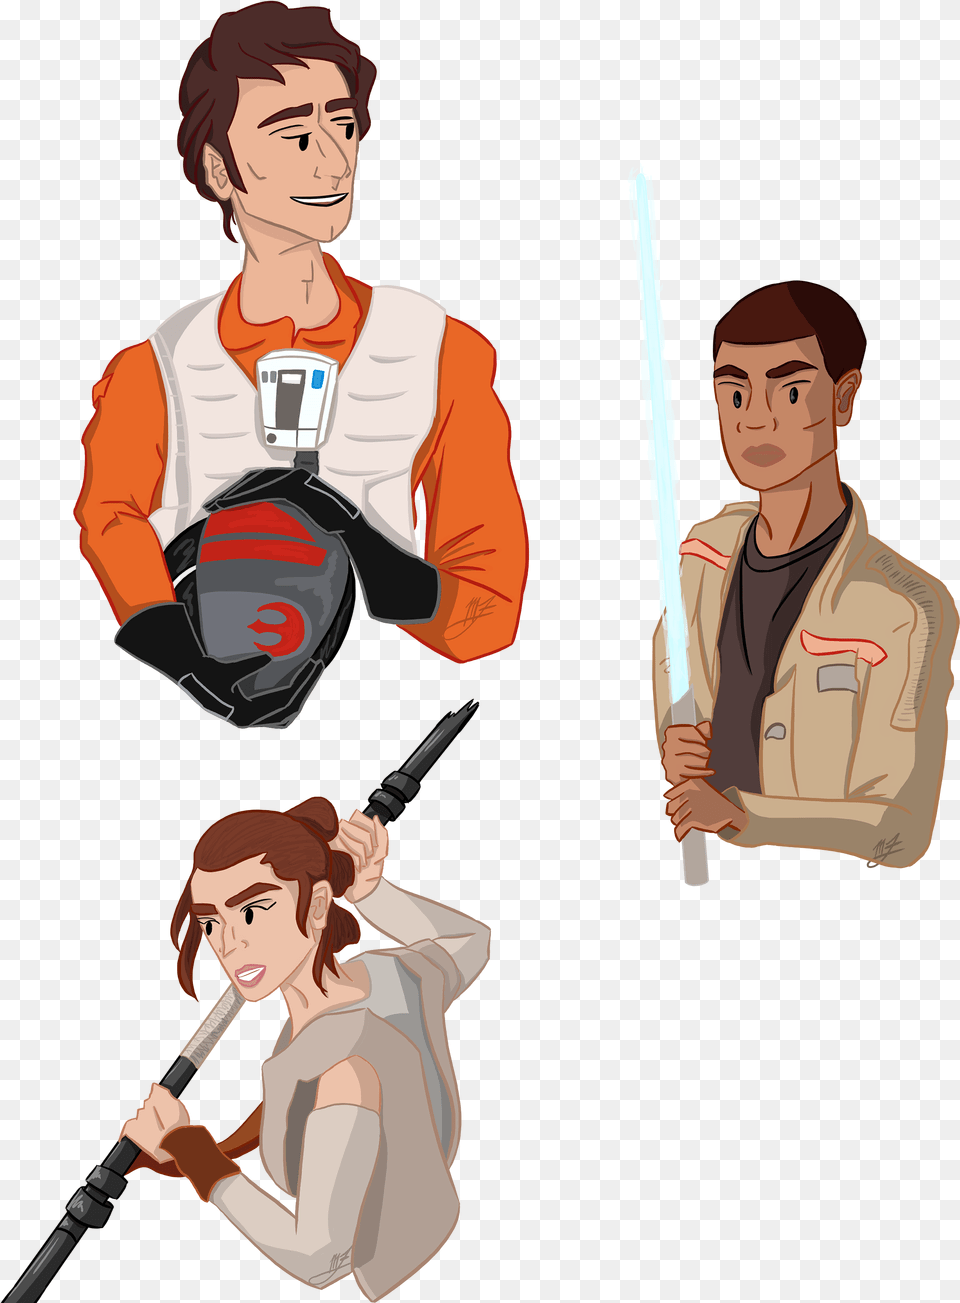 Busts Of Poe Finn And Rey From Star Wars Cartoon Clipart Animated Finn From Star Wars, Adult, Person, Man, Male Png Image